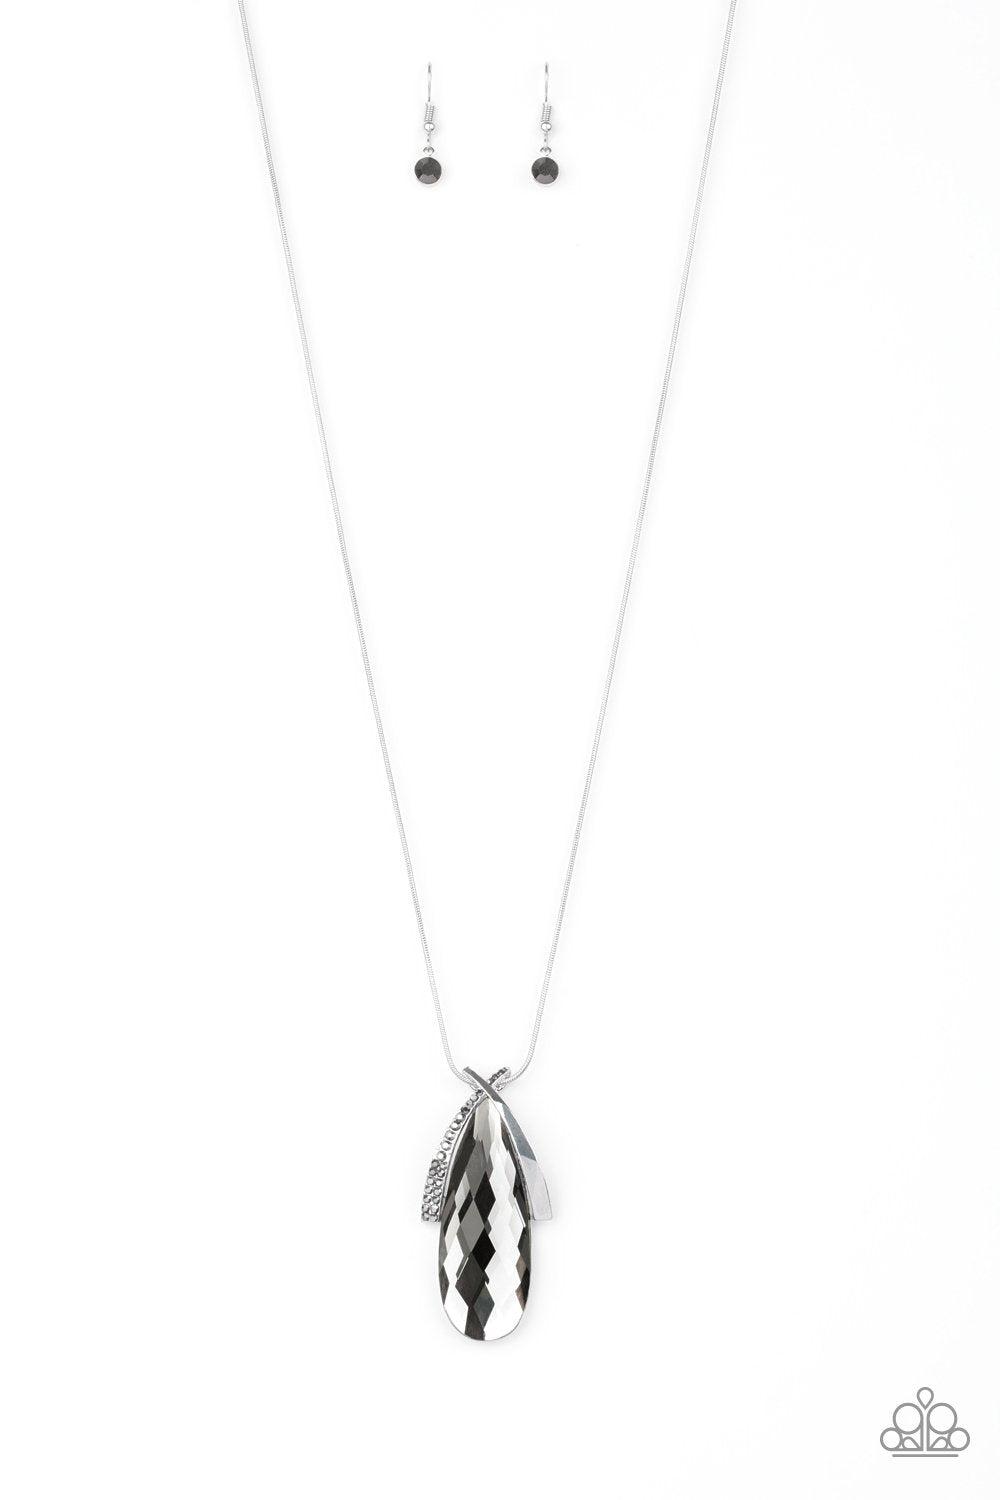 Stellar Sophistication Silver and Smoky Teardrop Pendant Necklace - Paparazzi Accessories-CarasShop.com - $5 Jewelry by Cara Jewels